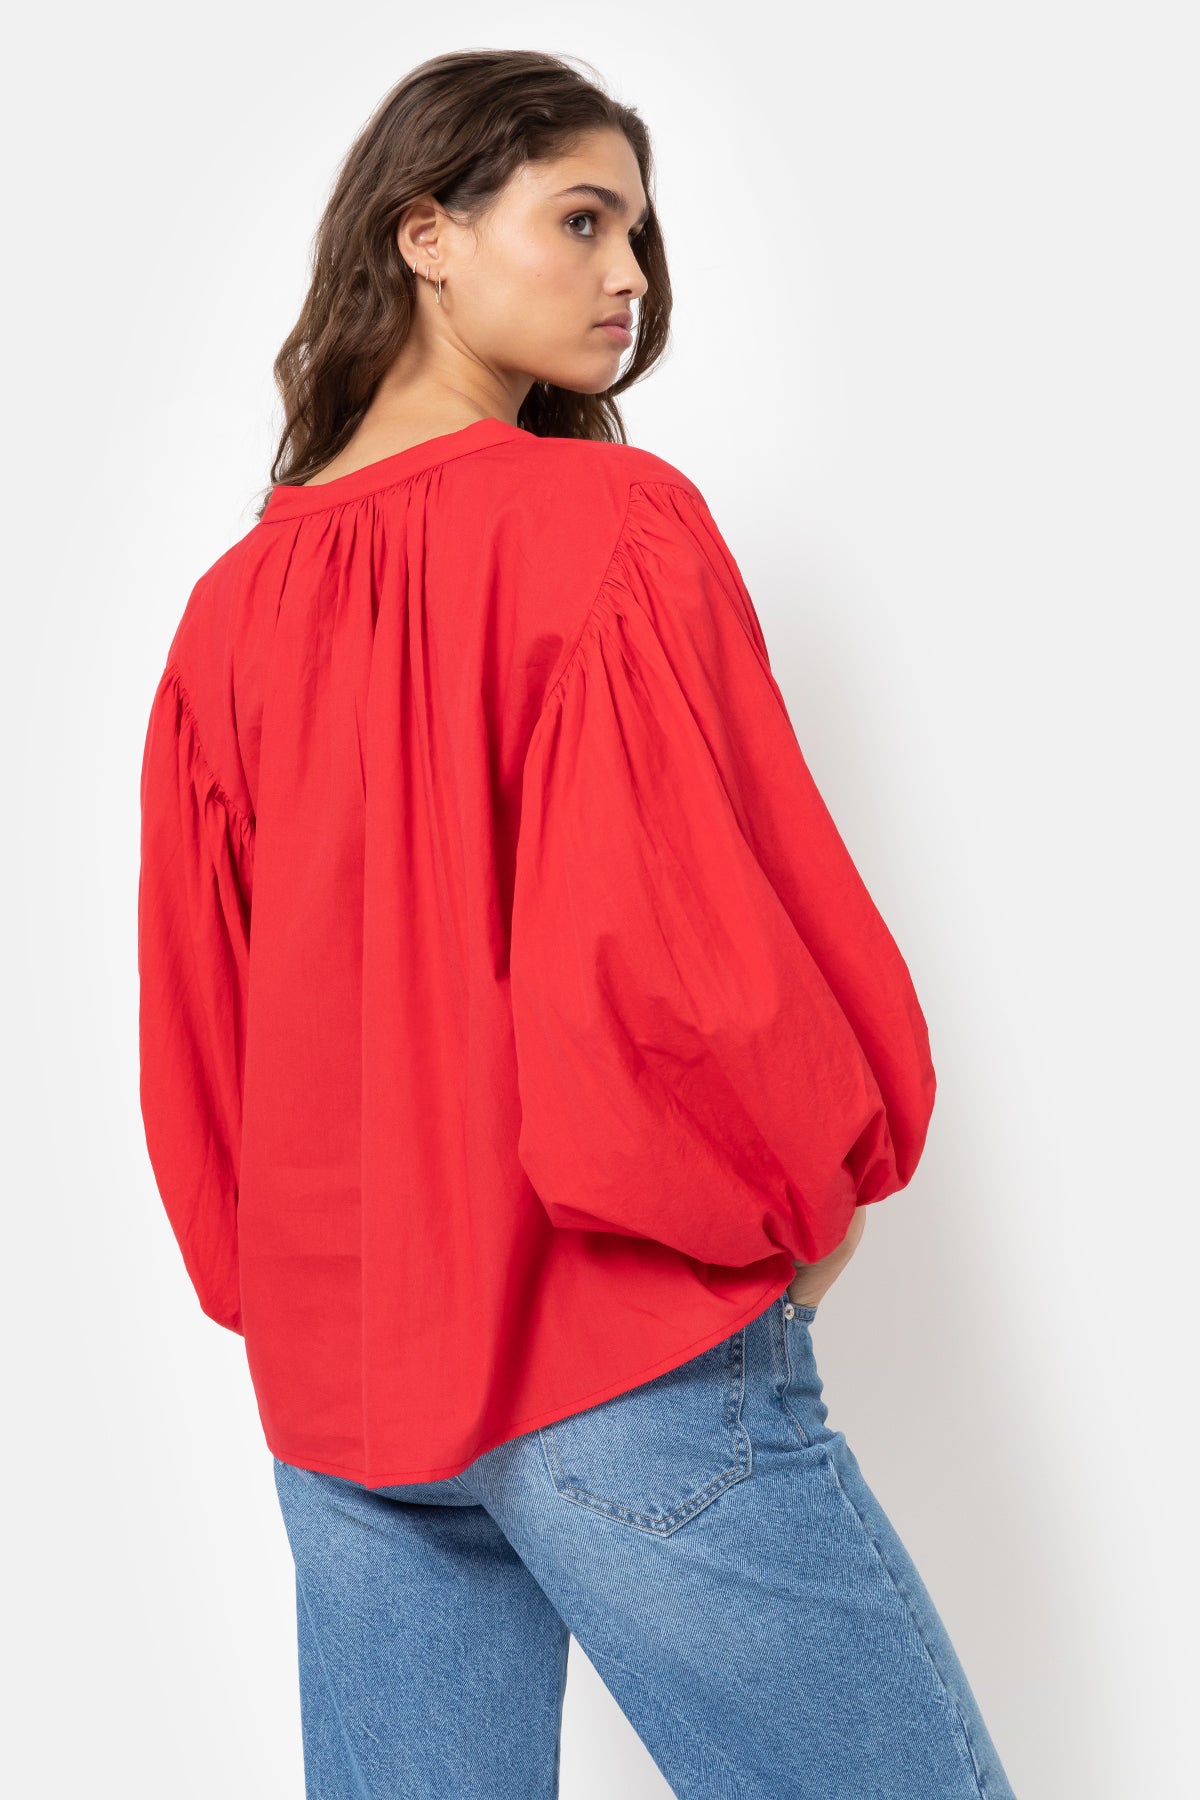 Islande Top with Puff Sleeves | Toreador Red